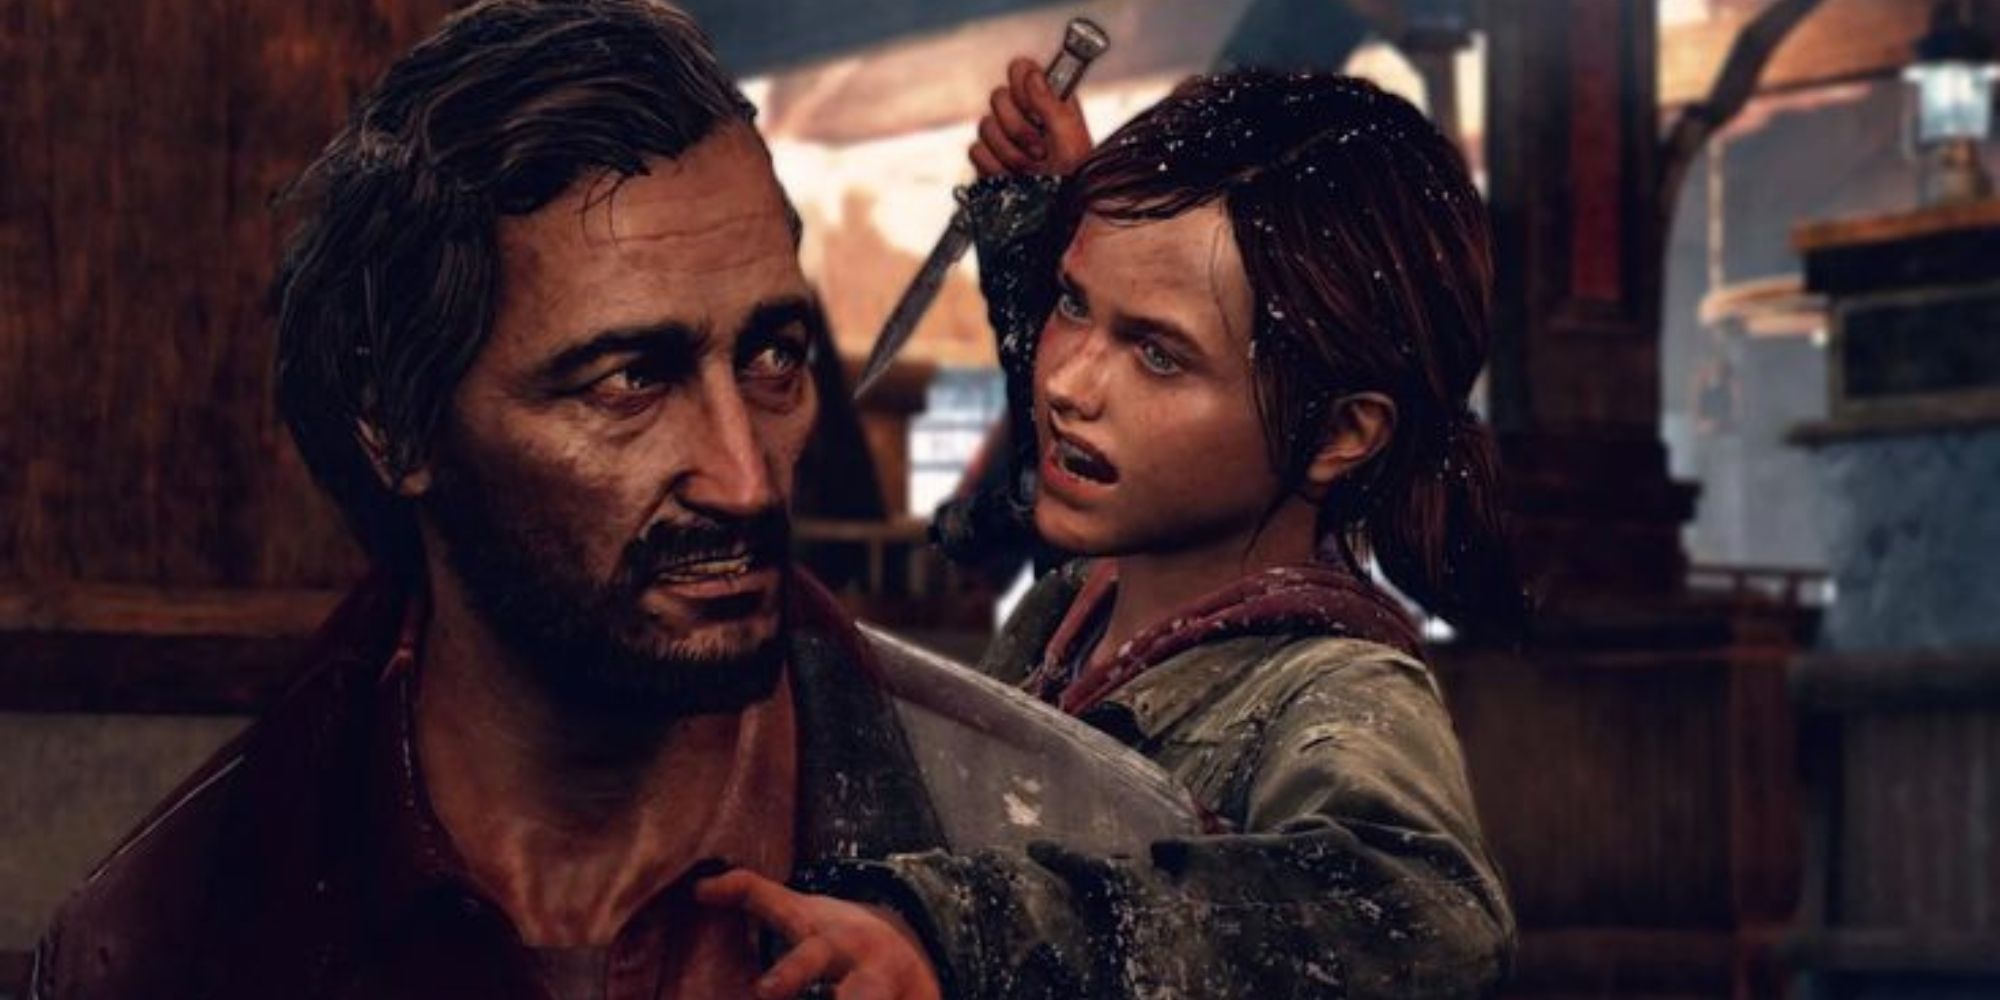 David and Ellie in The Last of Us